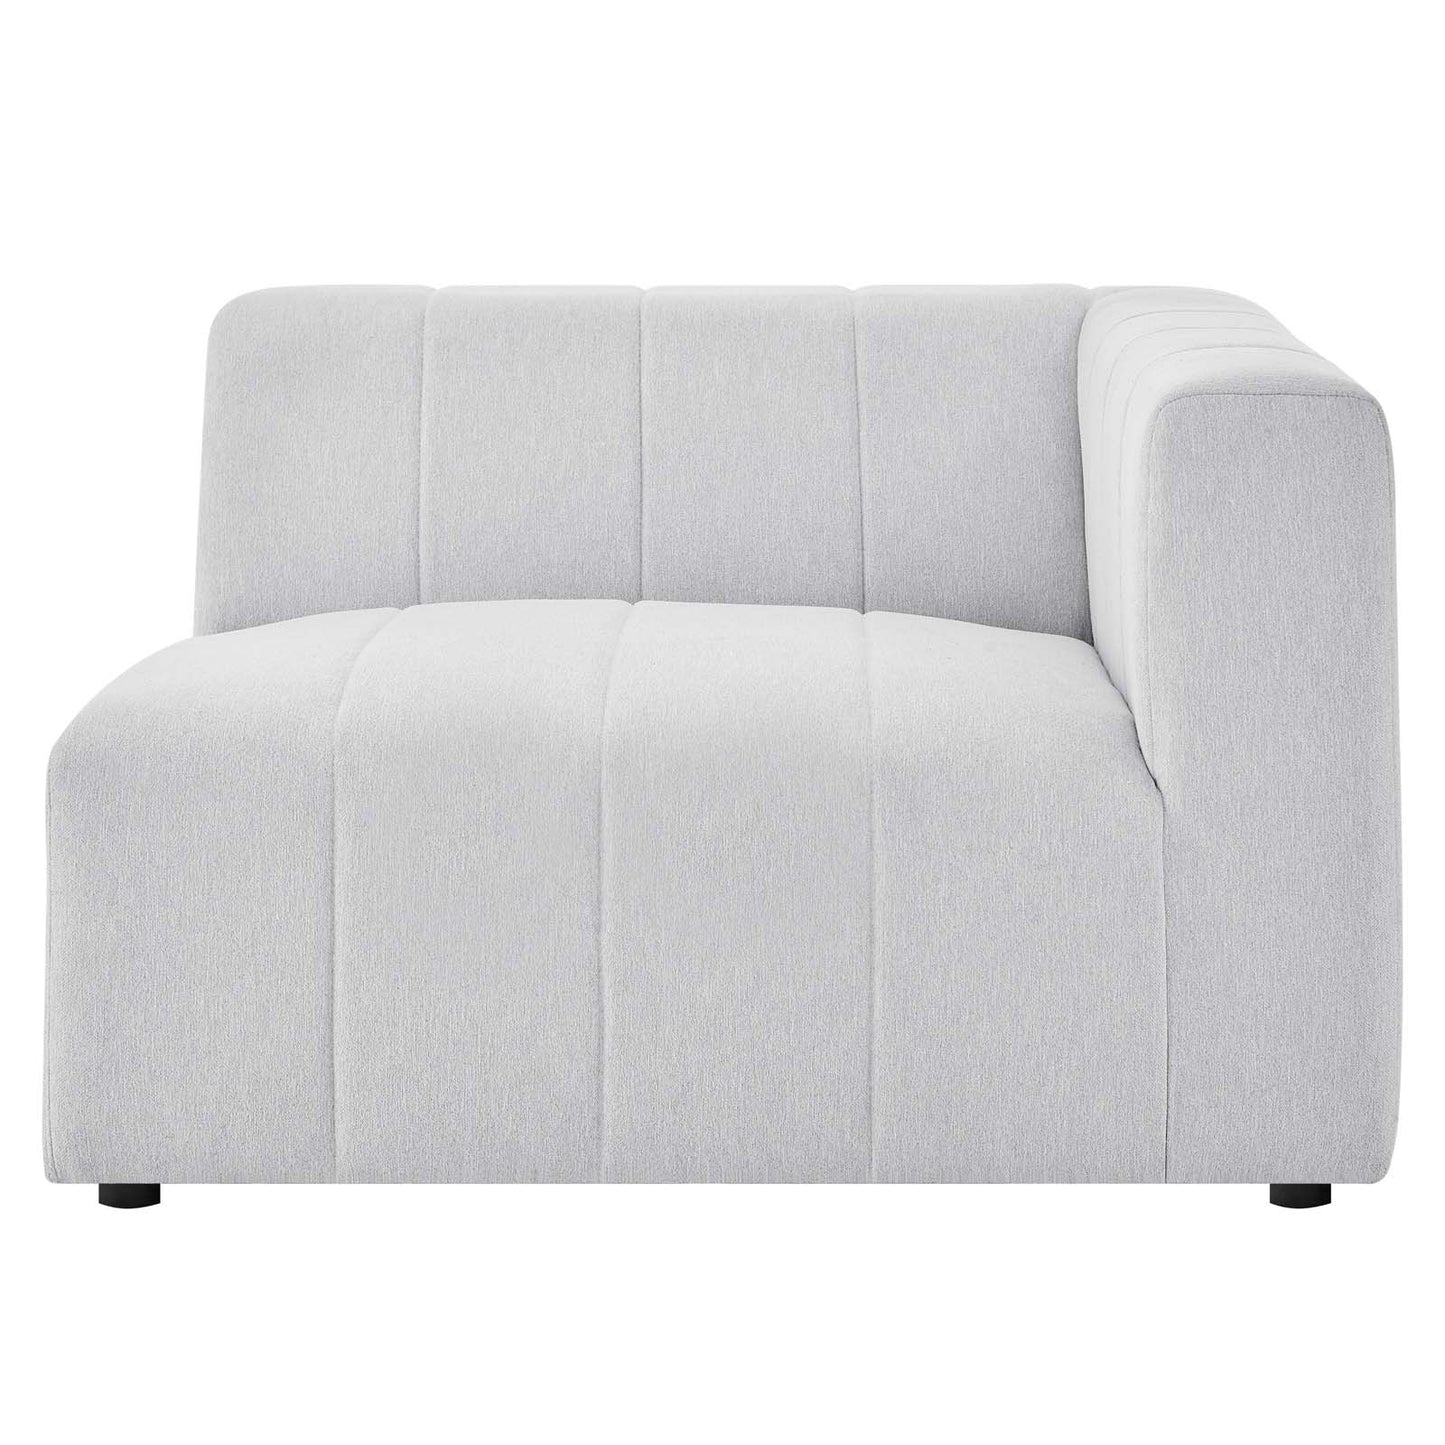 Bartlett Upholstered Fabric 4-Piece Sectional Sofa Ivory EEI-4516-IVO